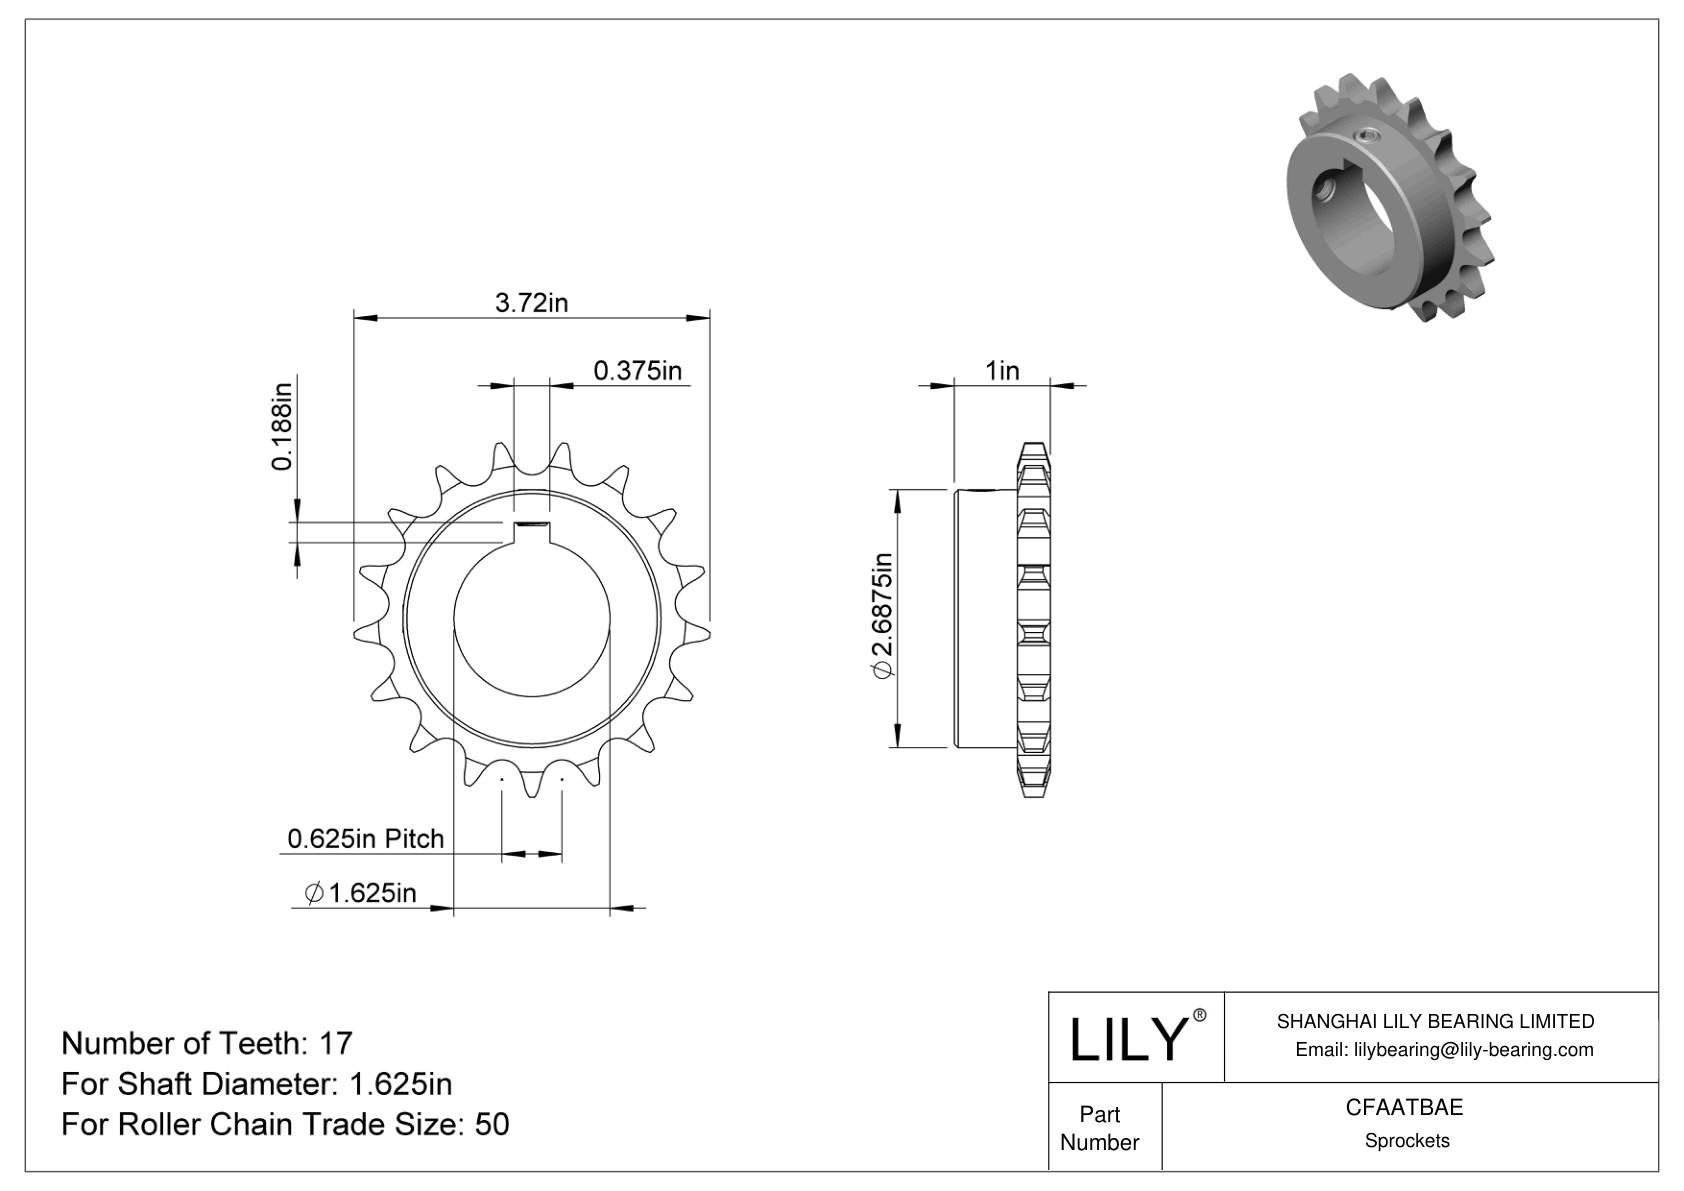 CFAATBAE Wear-Resistant Sprockets for ANSI Roller Chain cad drawing